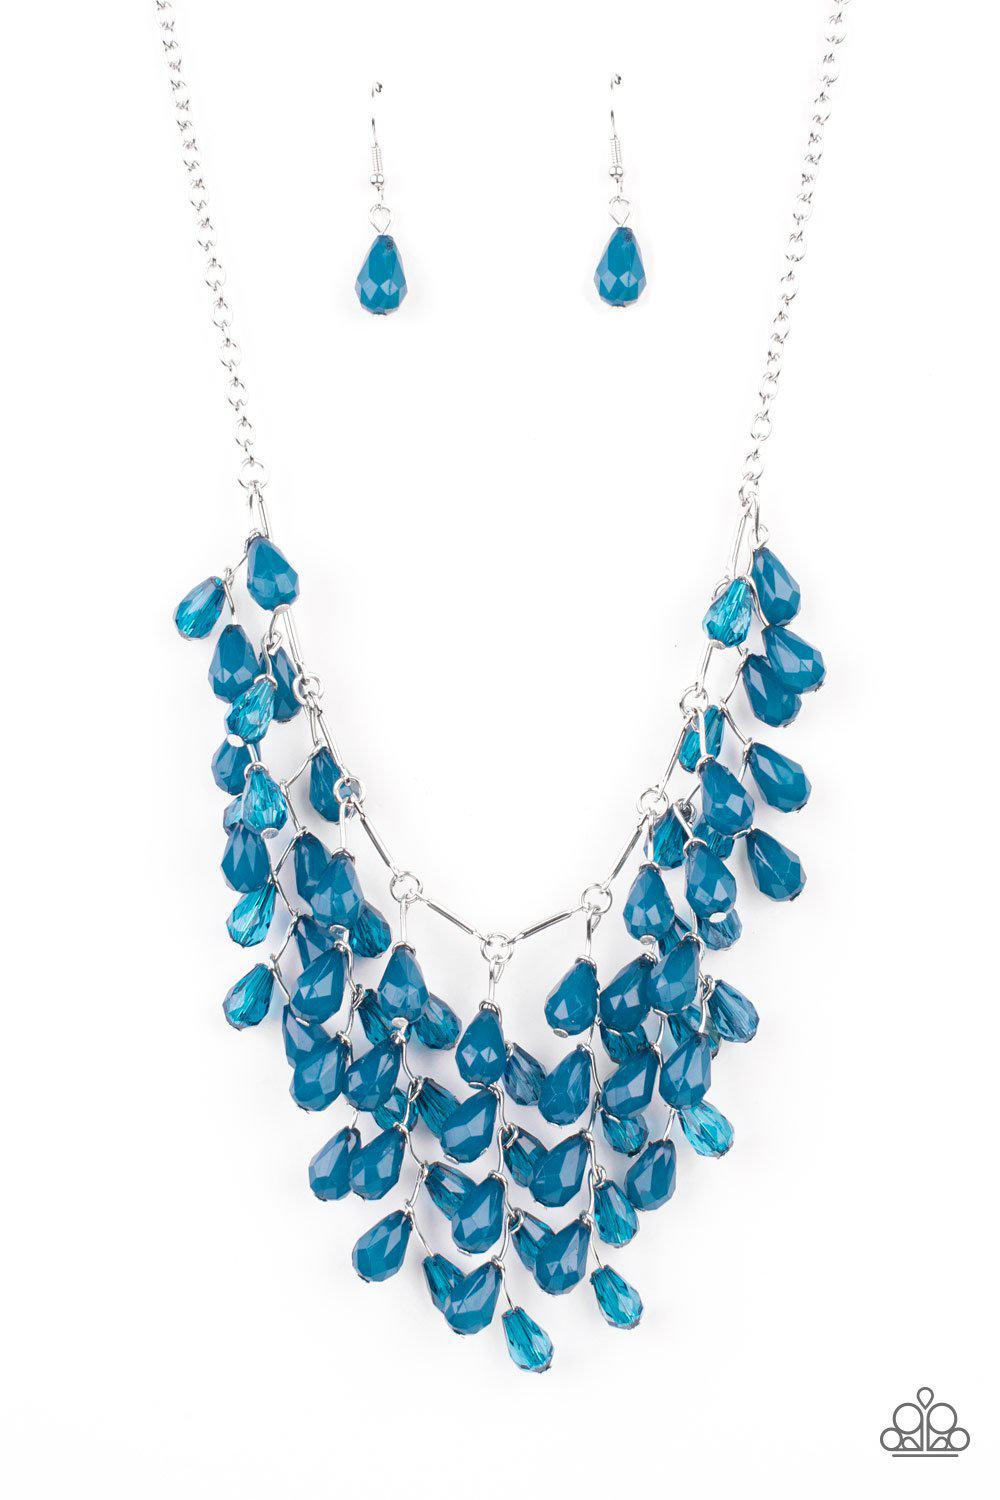 Garden Fairytale Blue and Silver Necklace - Paparazzi Accessories 2021 Convention Exclusive- lightbox - CarasShop.com - $5 Jewelry by Cara Jewels